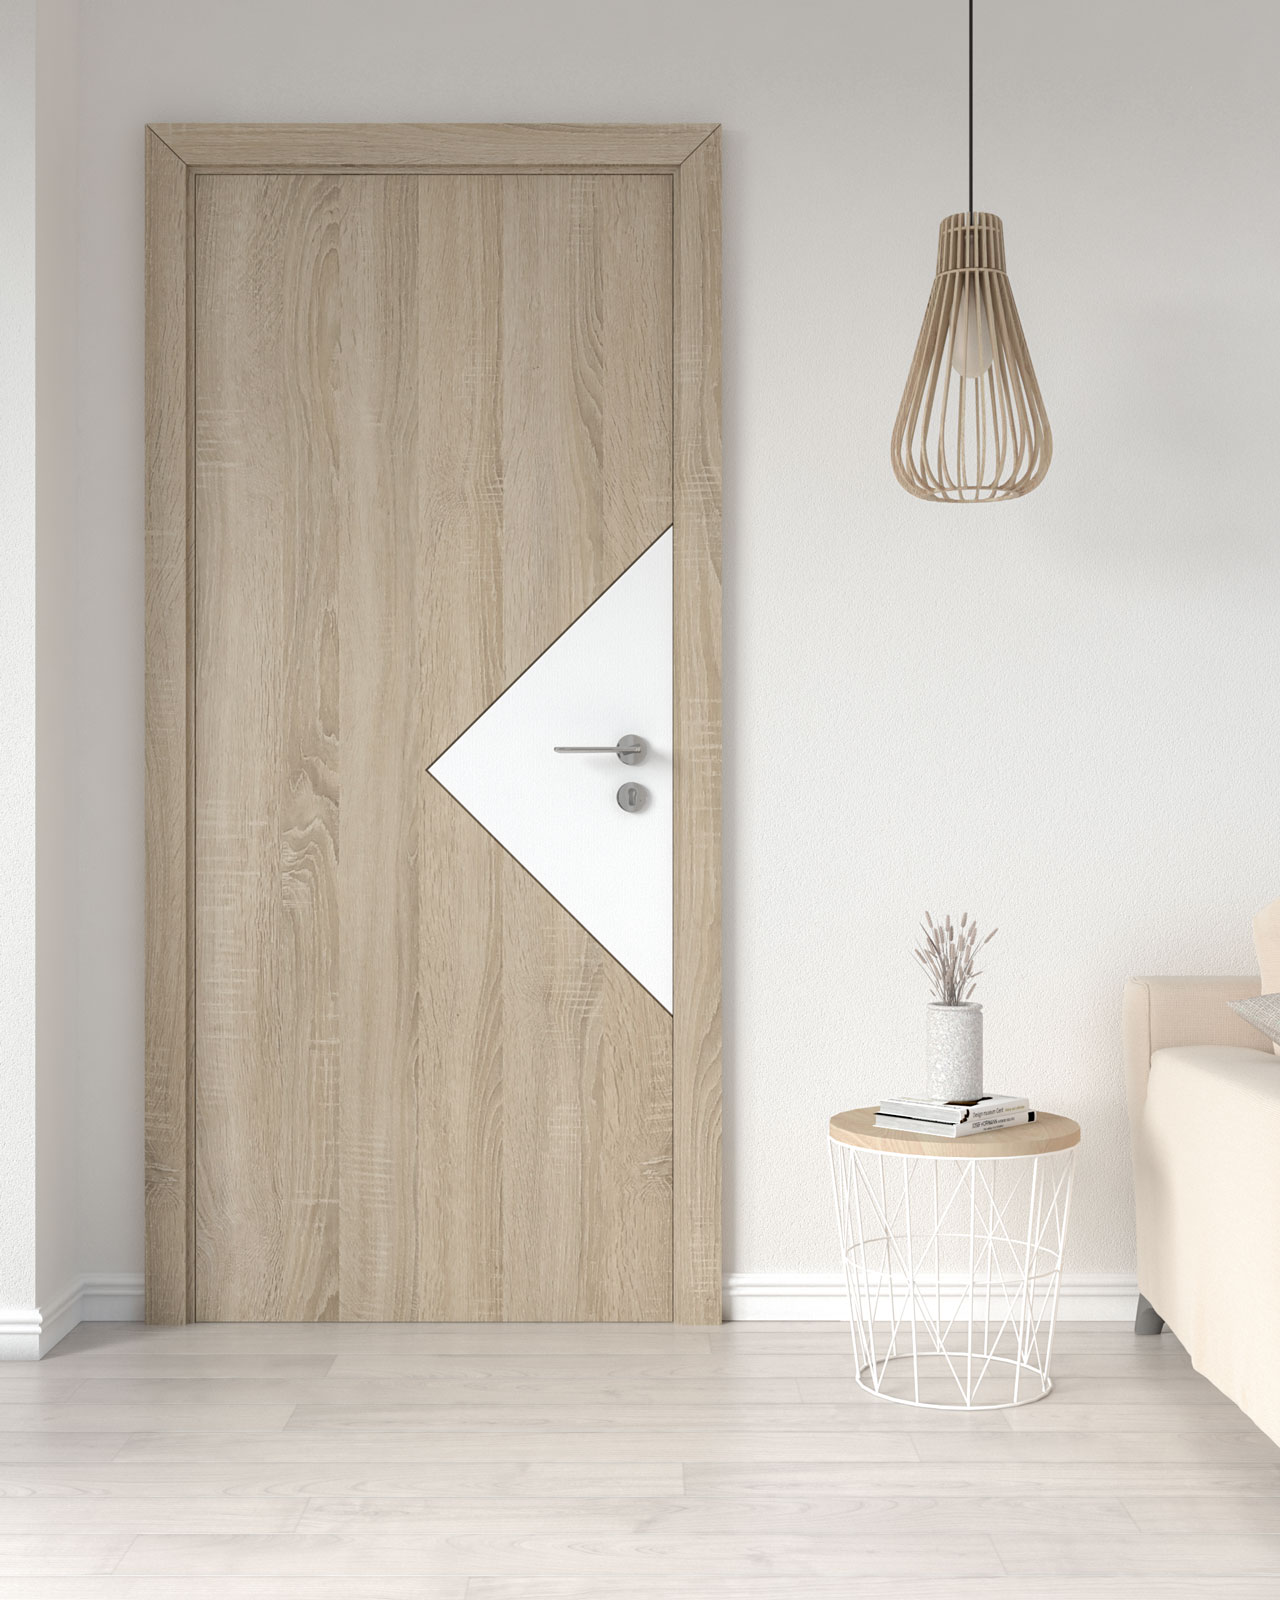 Stylish door with white geometric accent